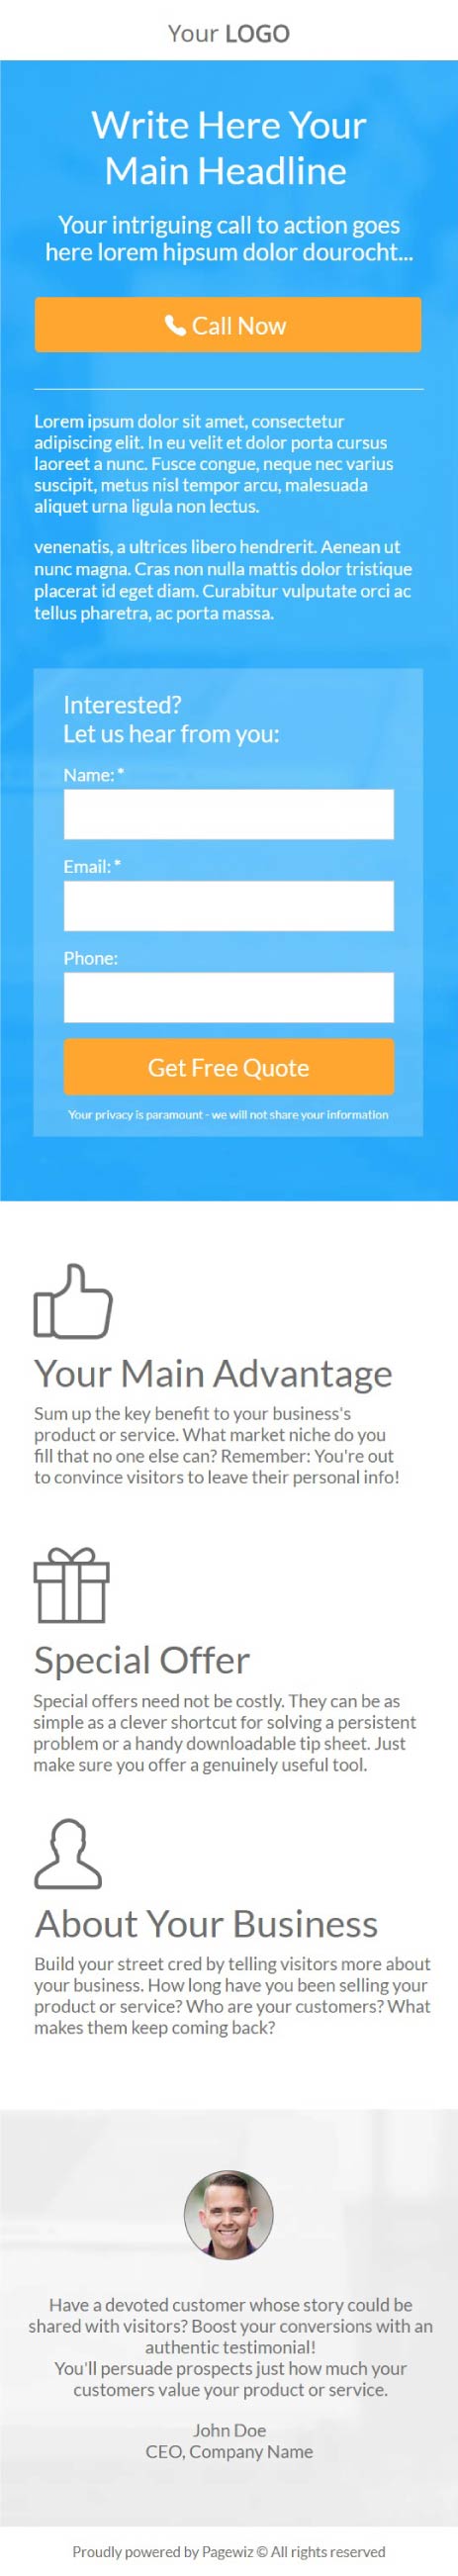 Landing page template: Easy blue